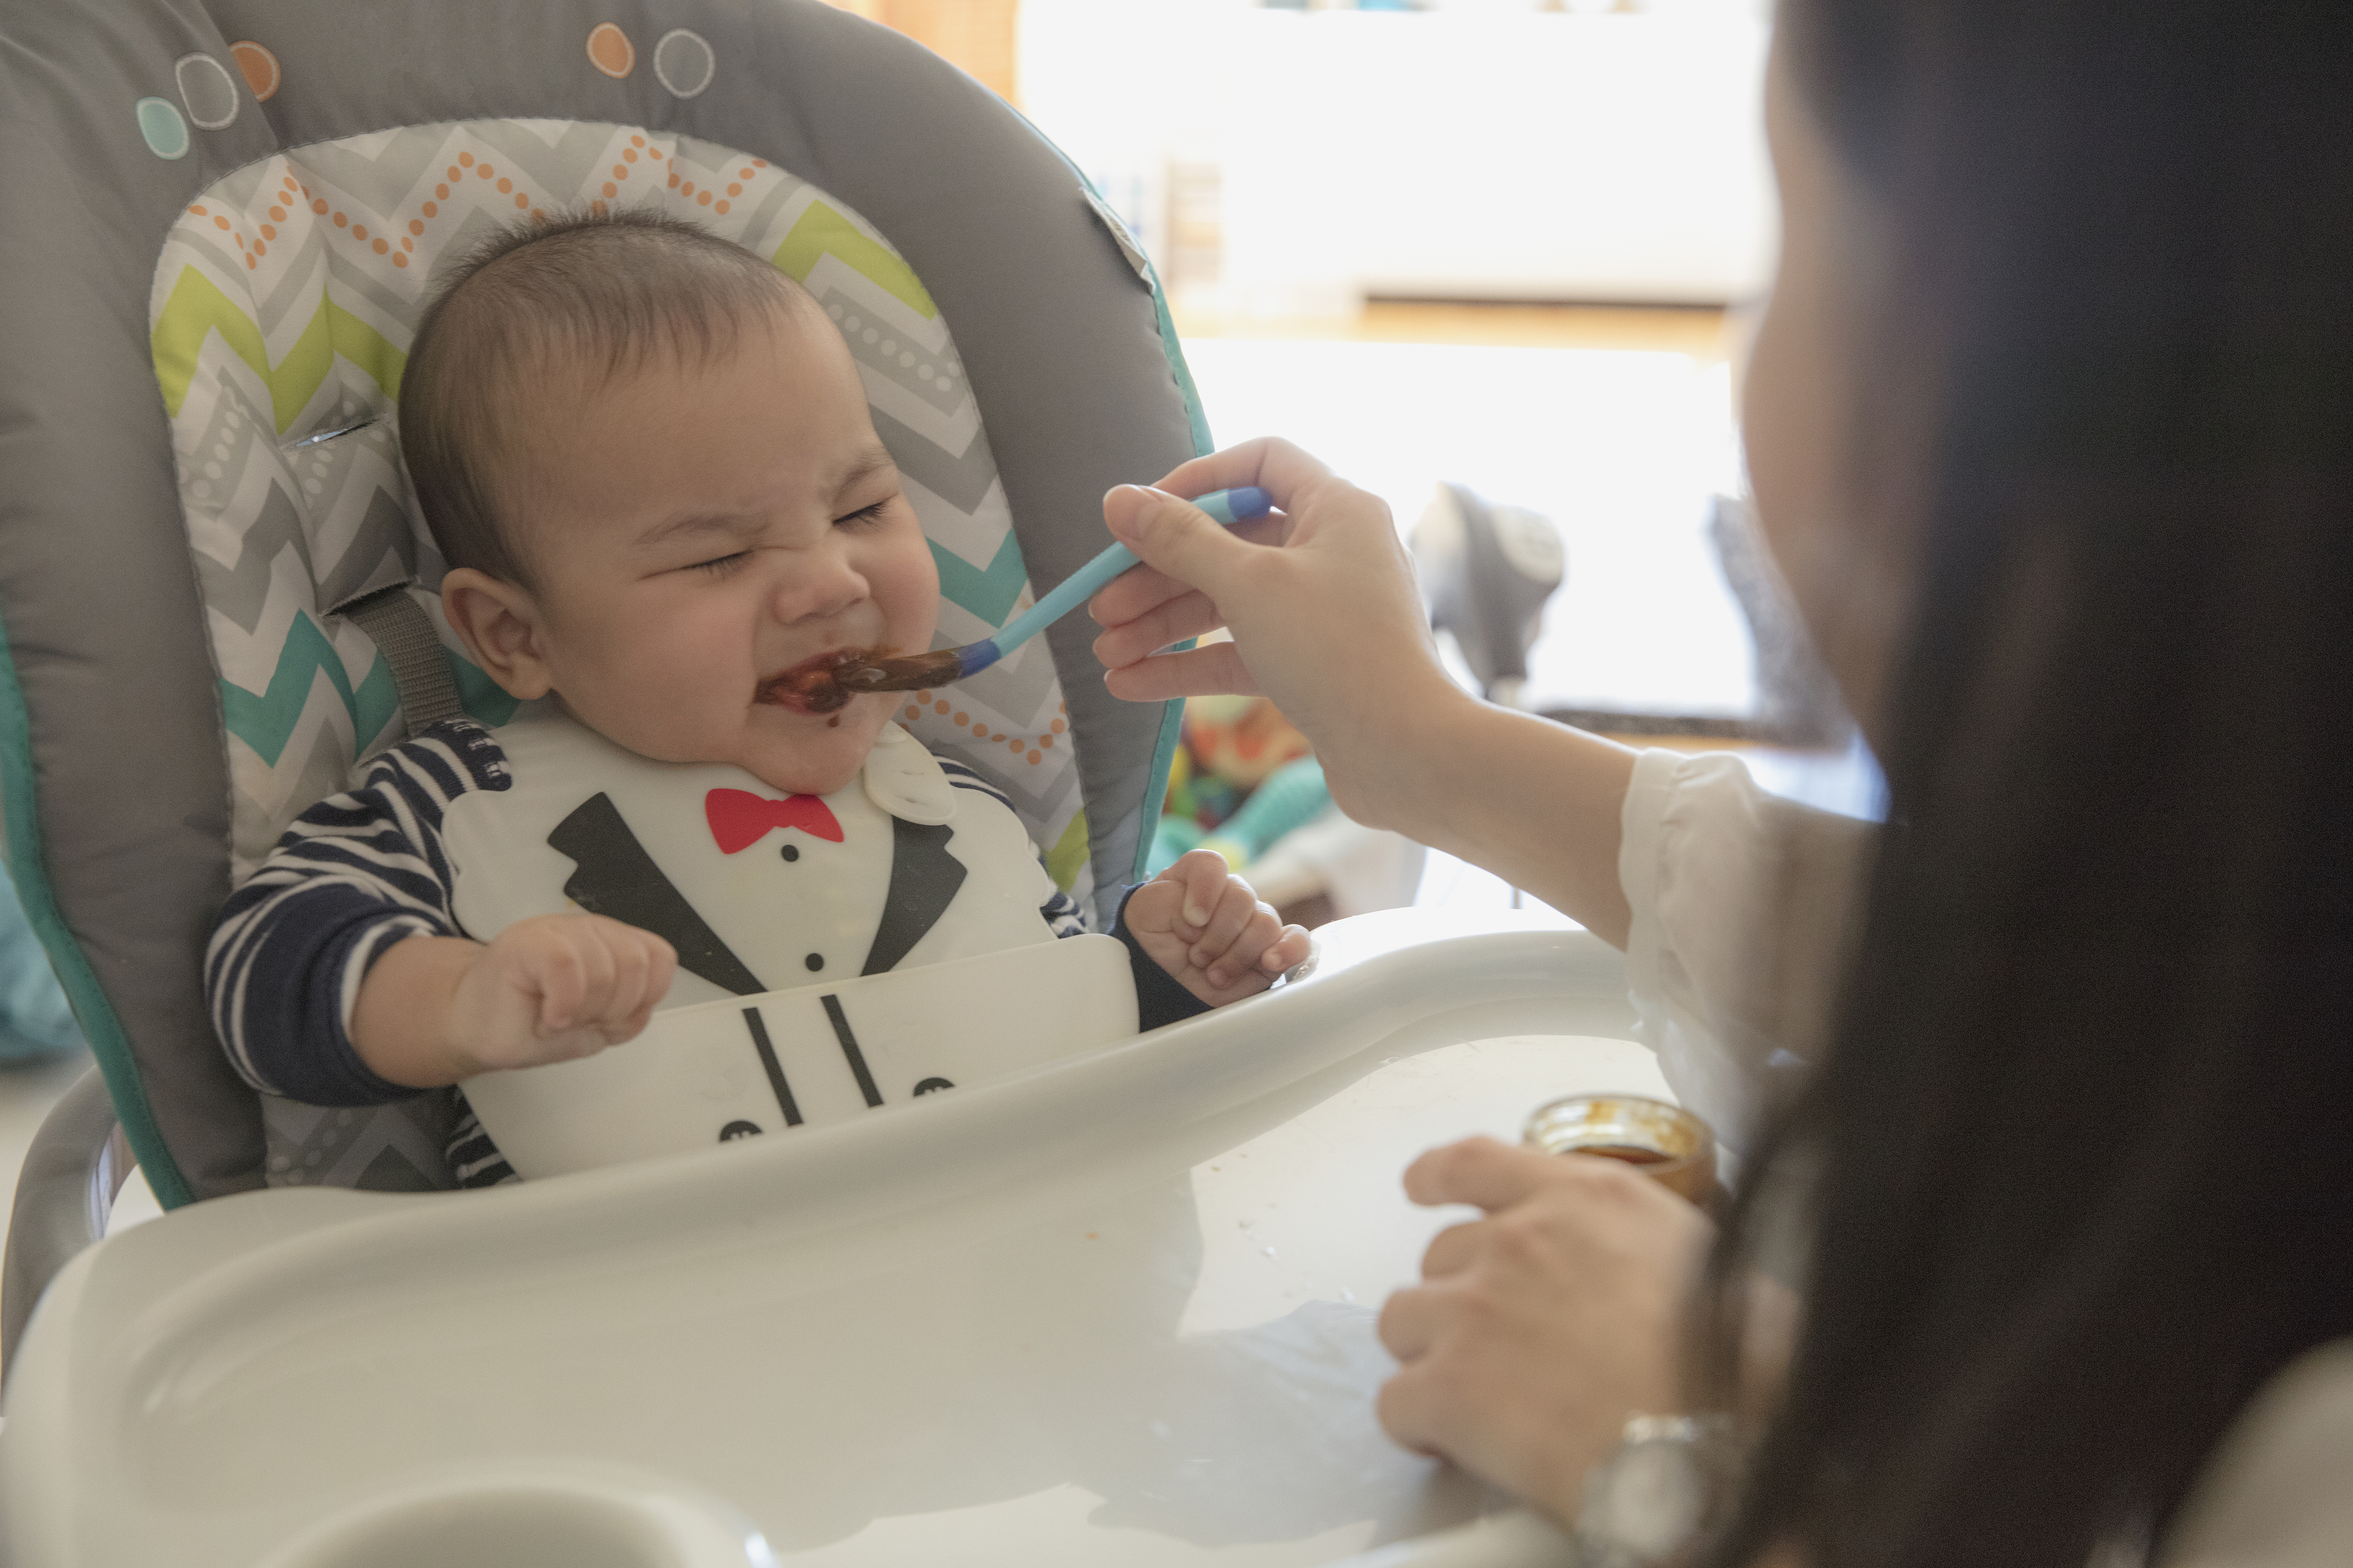 A mother feeding her baby in a high chair